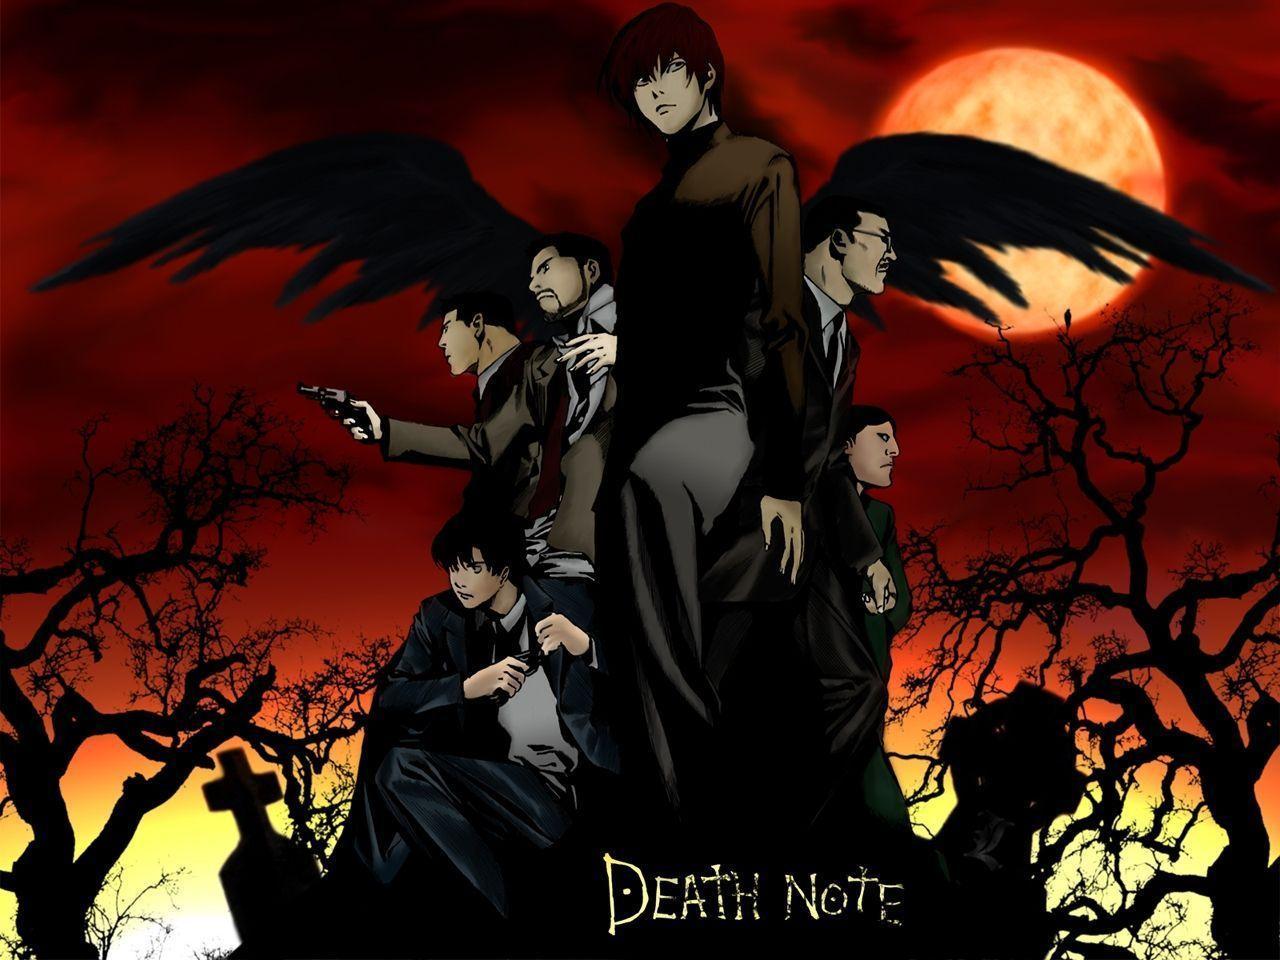 Death Note Hd Wallpapers Free Download - Wallpaperforu